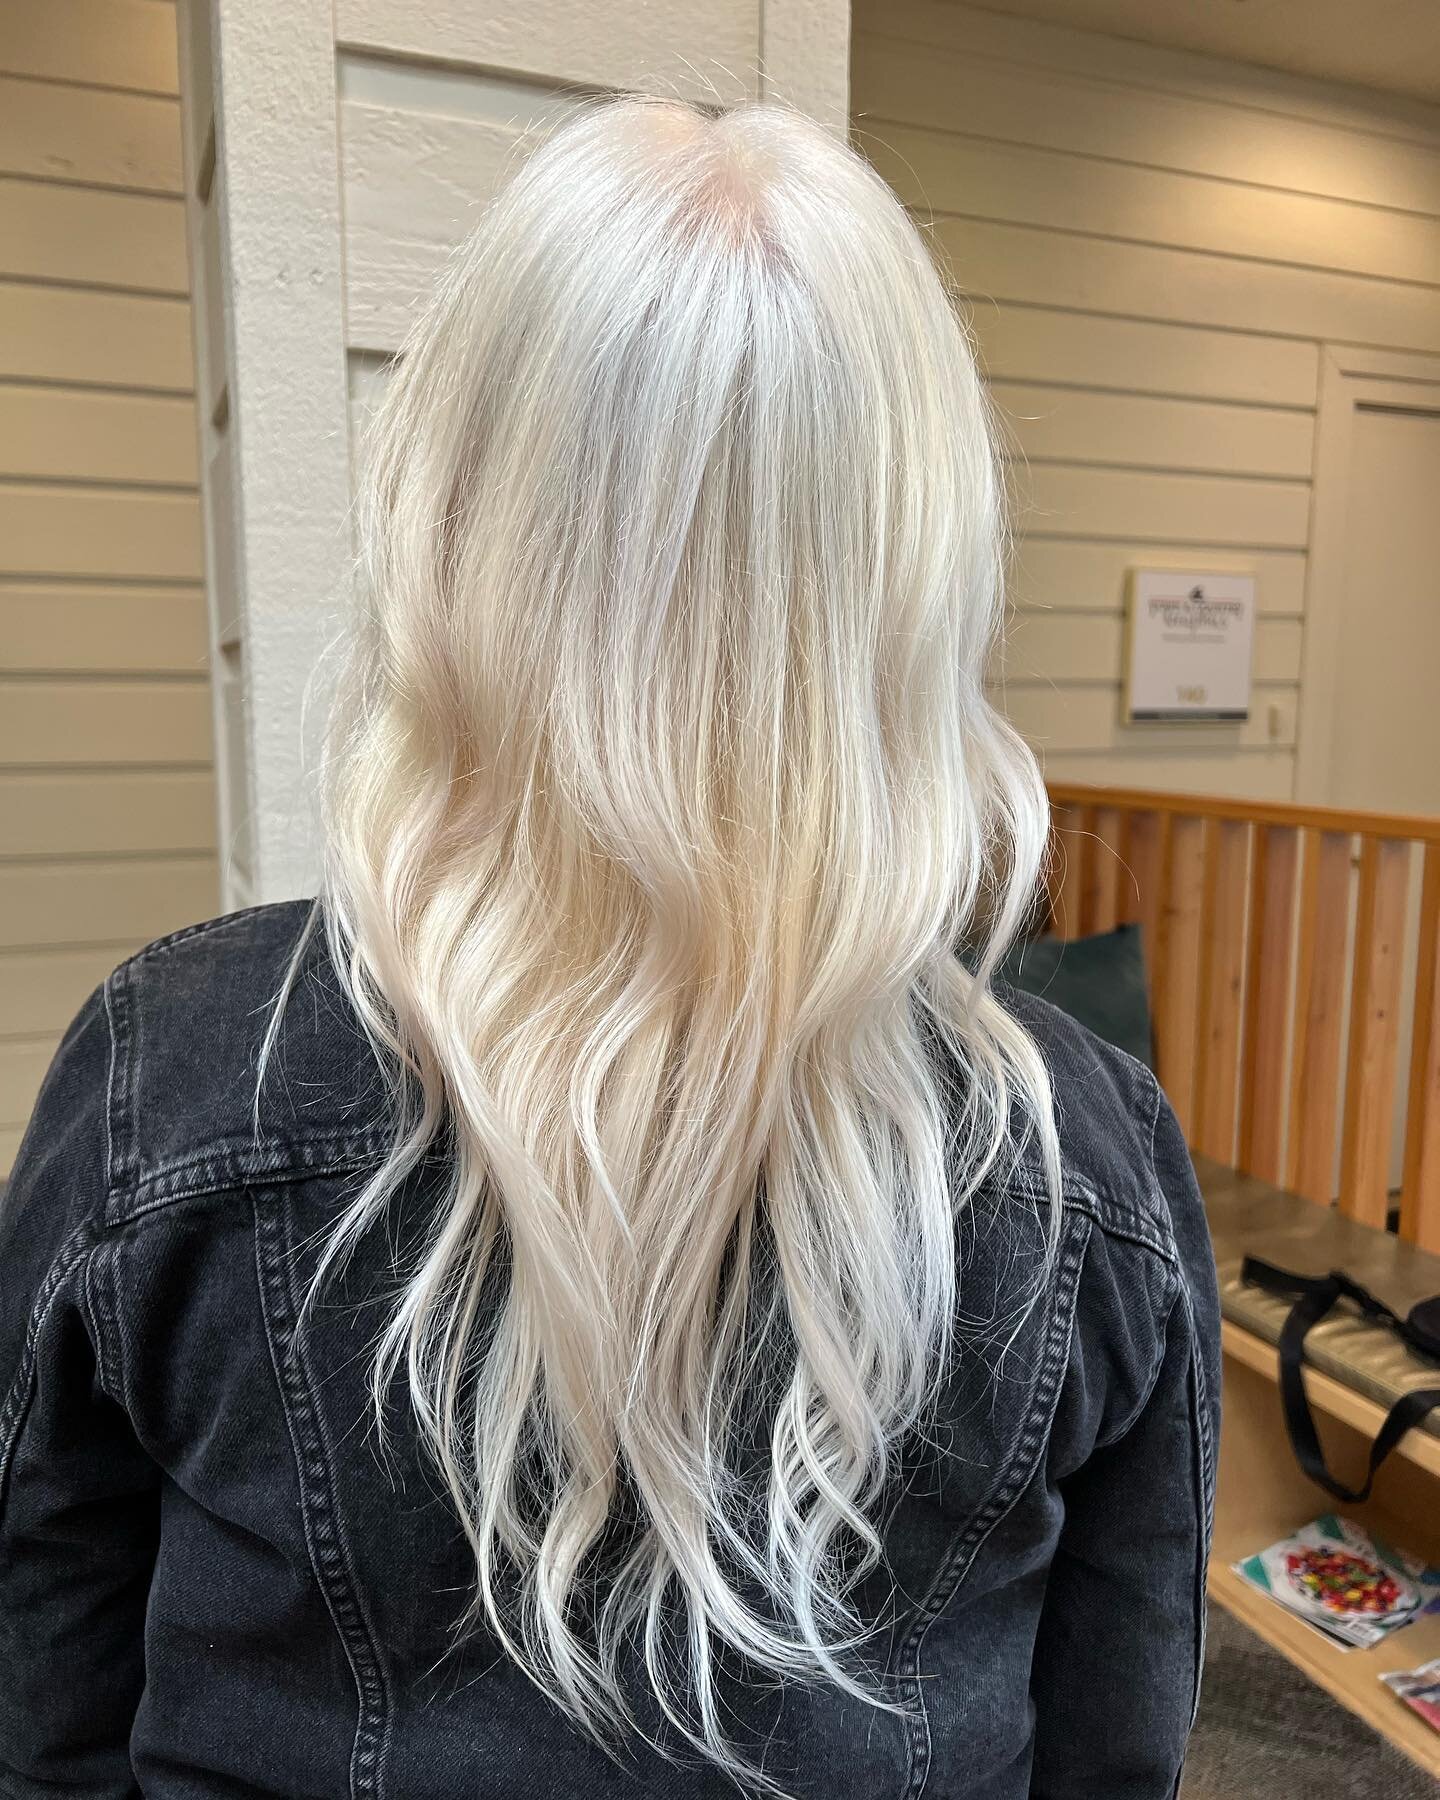 Ok I&rsquo;m ready for summer now! 🌞 this client asked for a bleach and tone for 3 years but finally had enough natural for me to deliver the ice 🧊 🔥  thank you @k18hair for leaving her hair in better shape than we started!